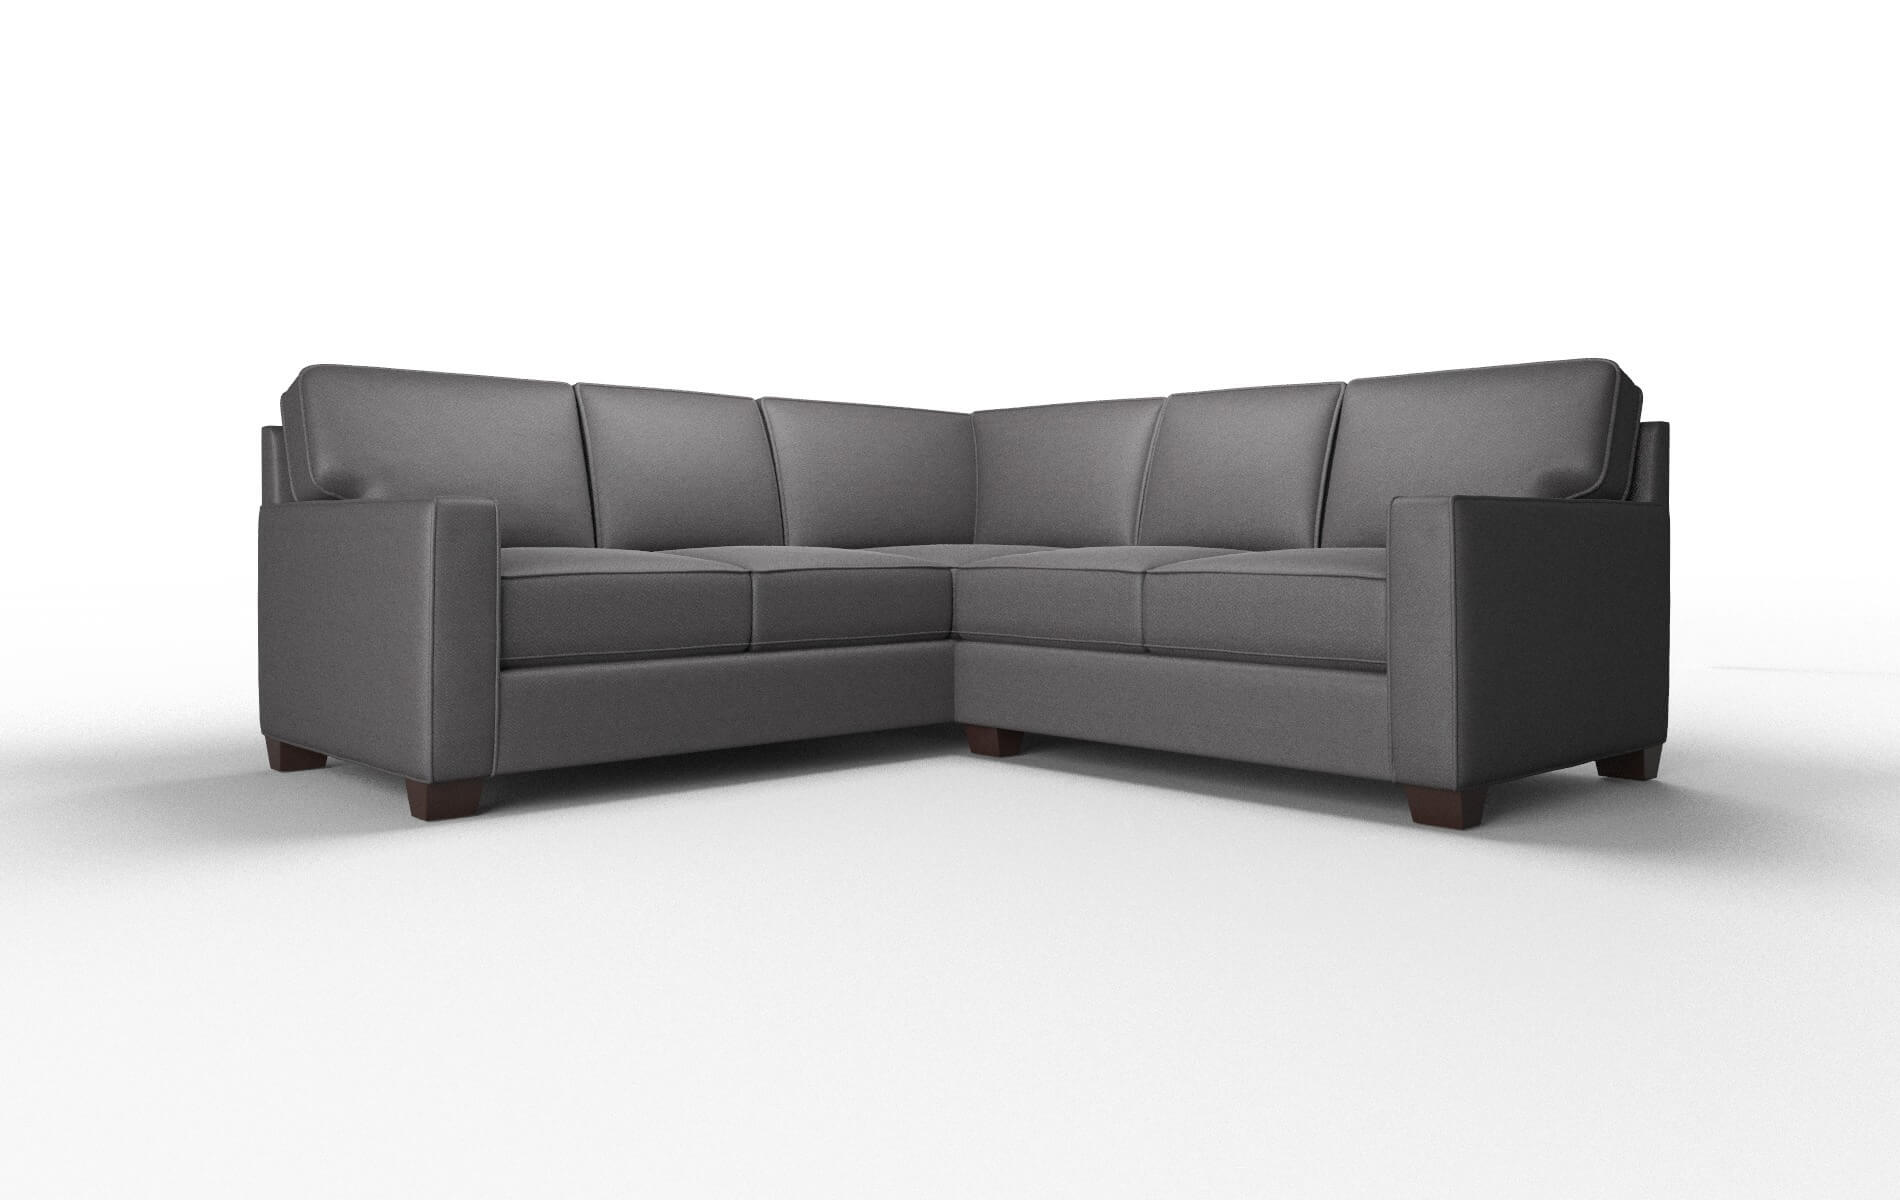 Chicago Royale Eclipse Sectional espresso legs